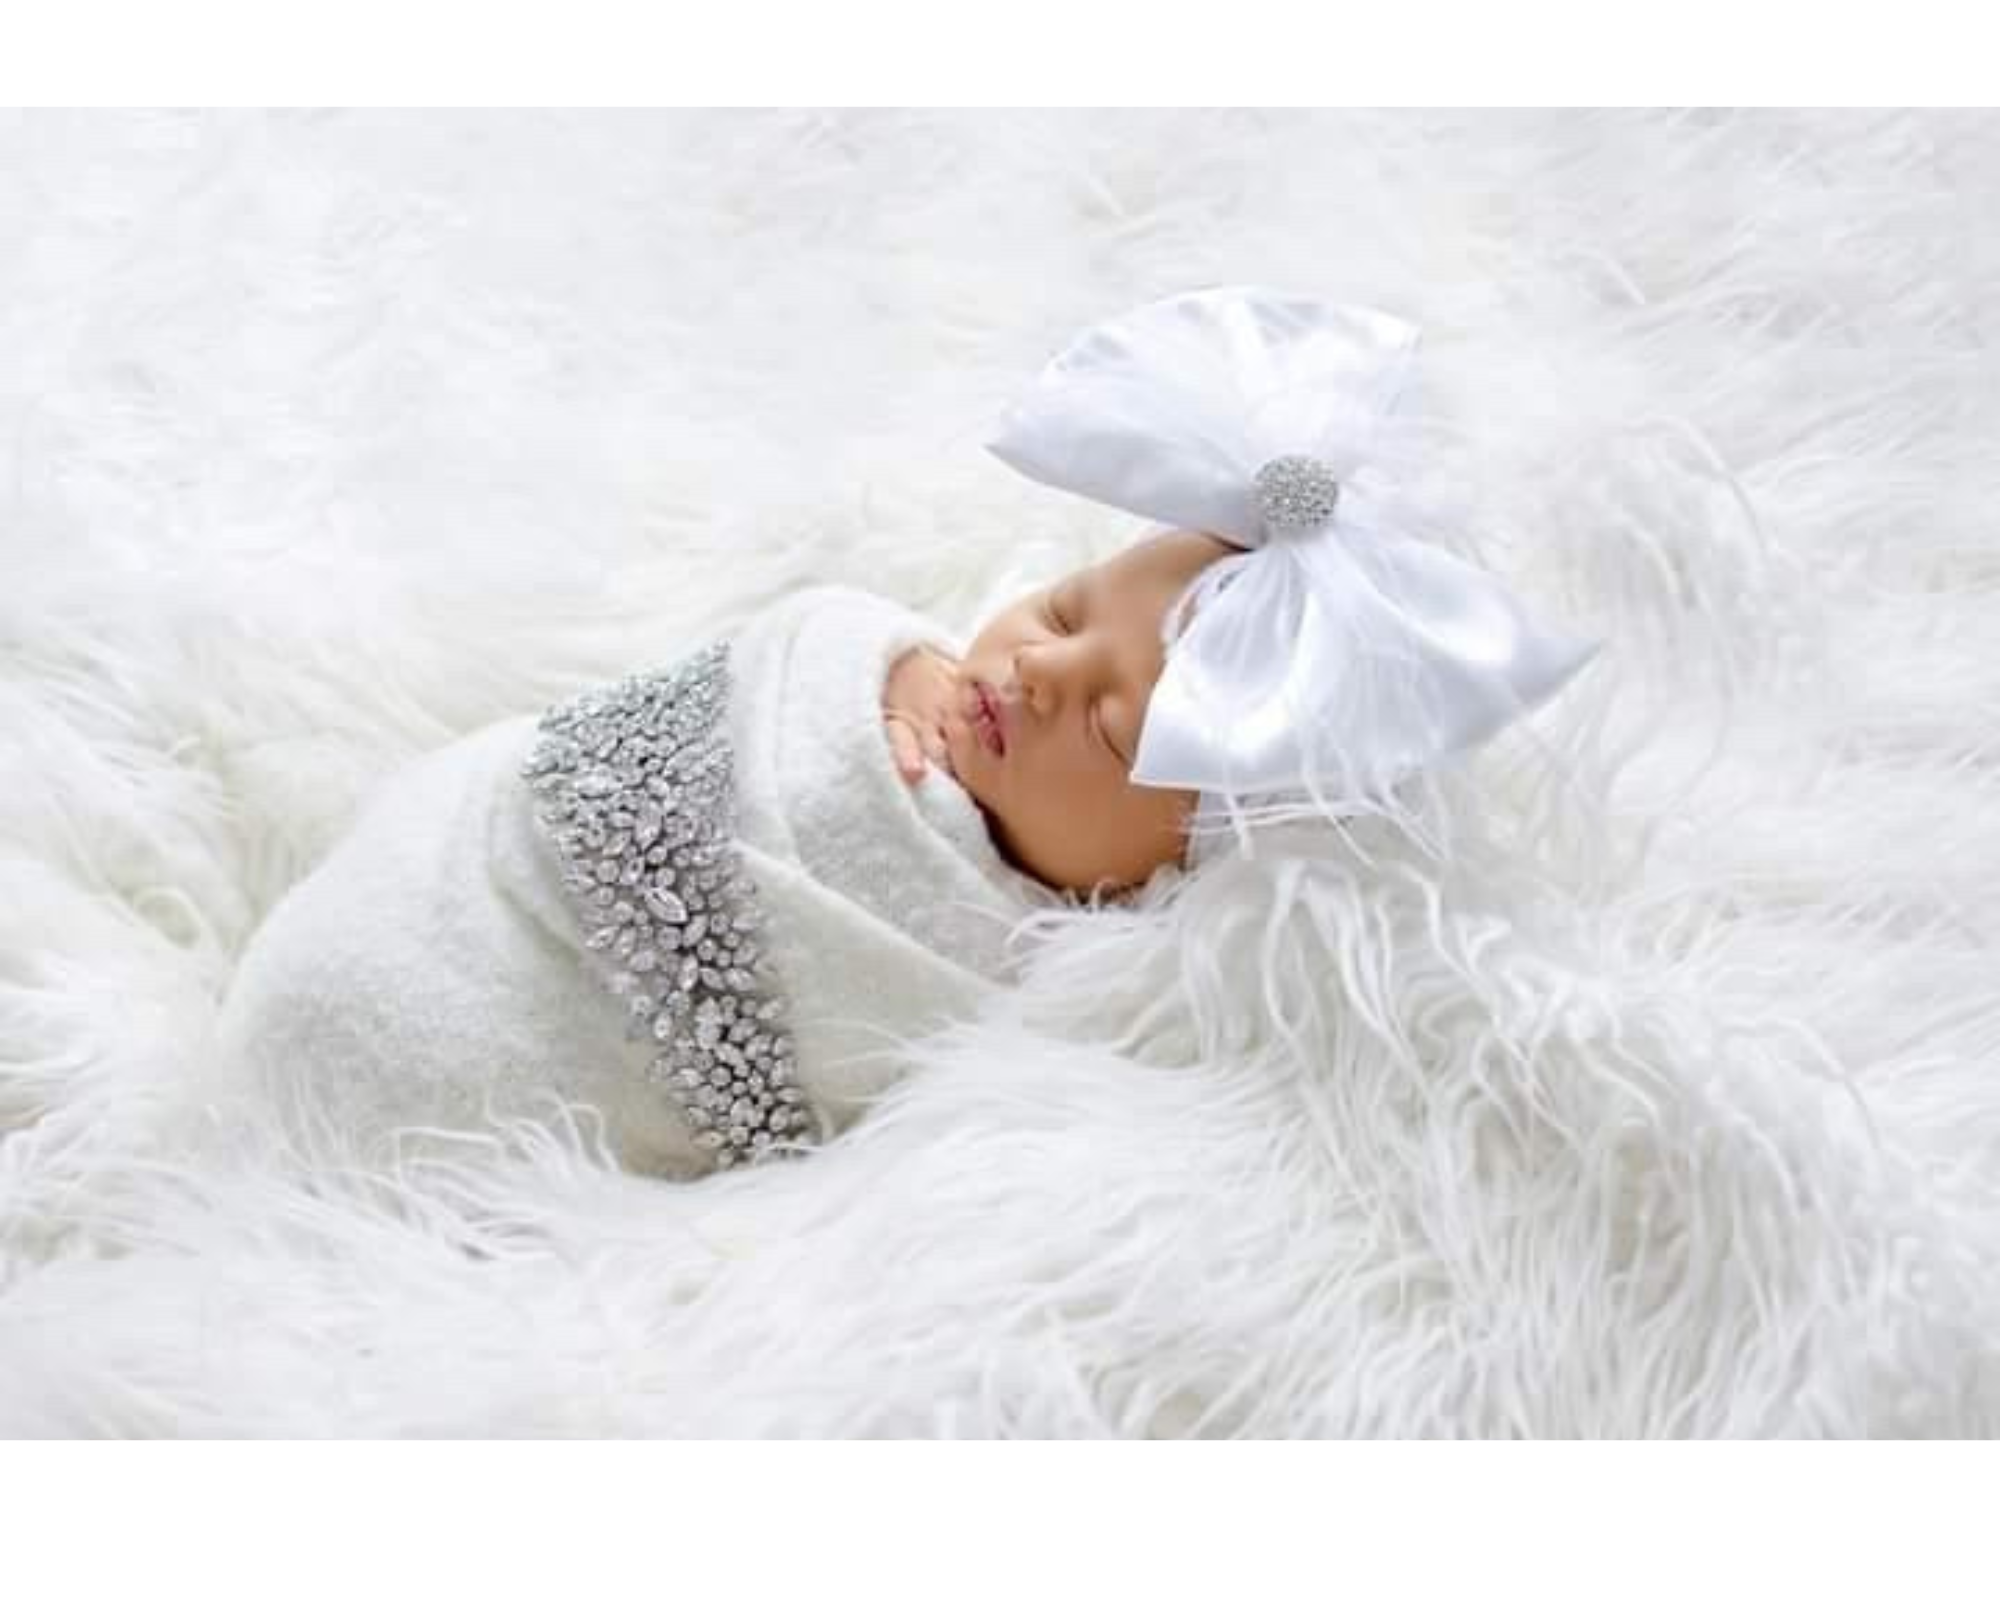 A sweet baby swaddled in white wearing her mommy’s Swarovski crystal bridal headpiece.